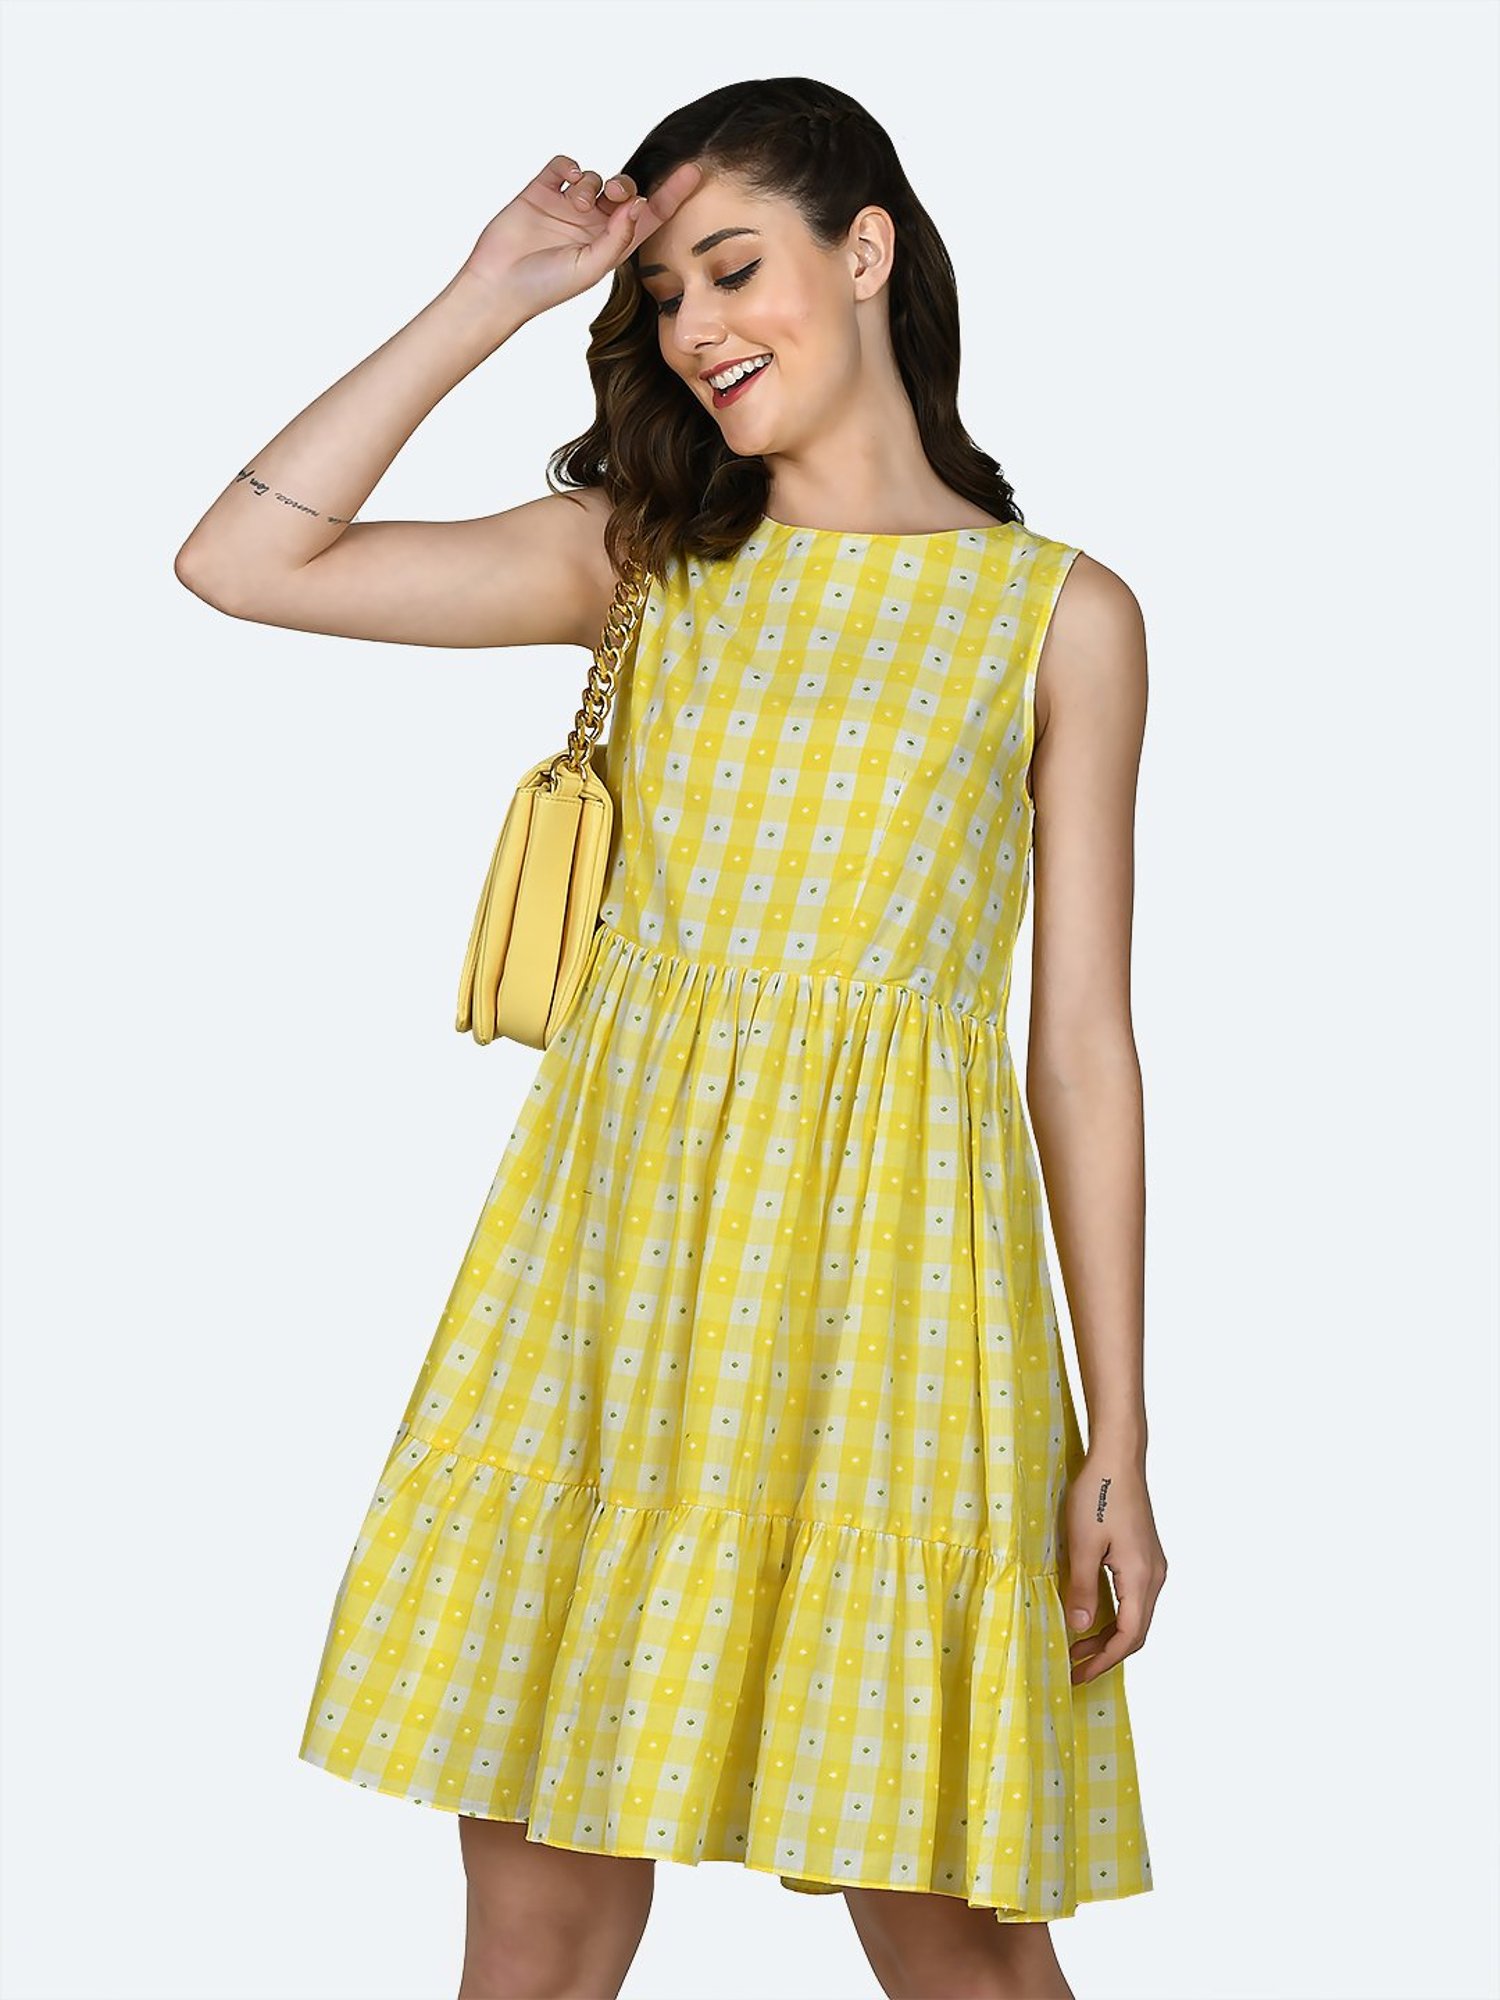 WornOnTV: Katy Perry's yellow floral print dress on American Idol | Katy  Perry | Clothes and Wardrobe from TV